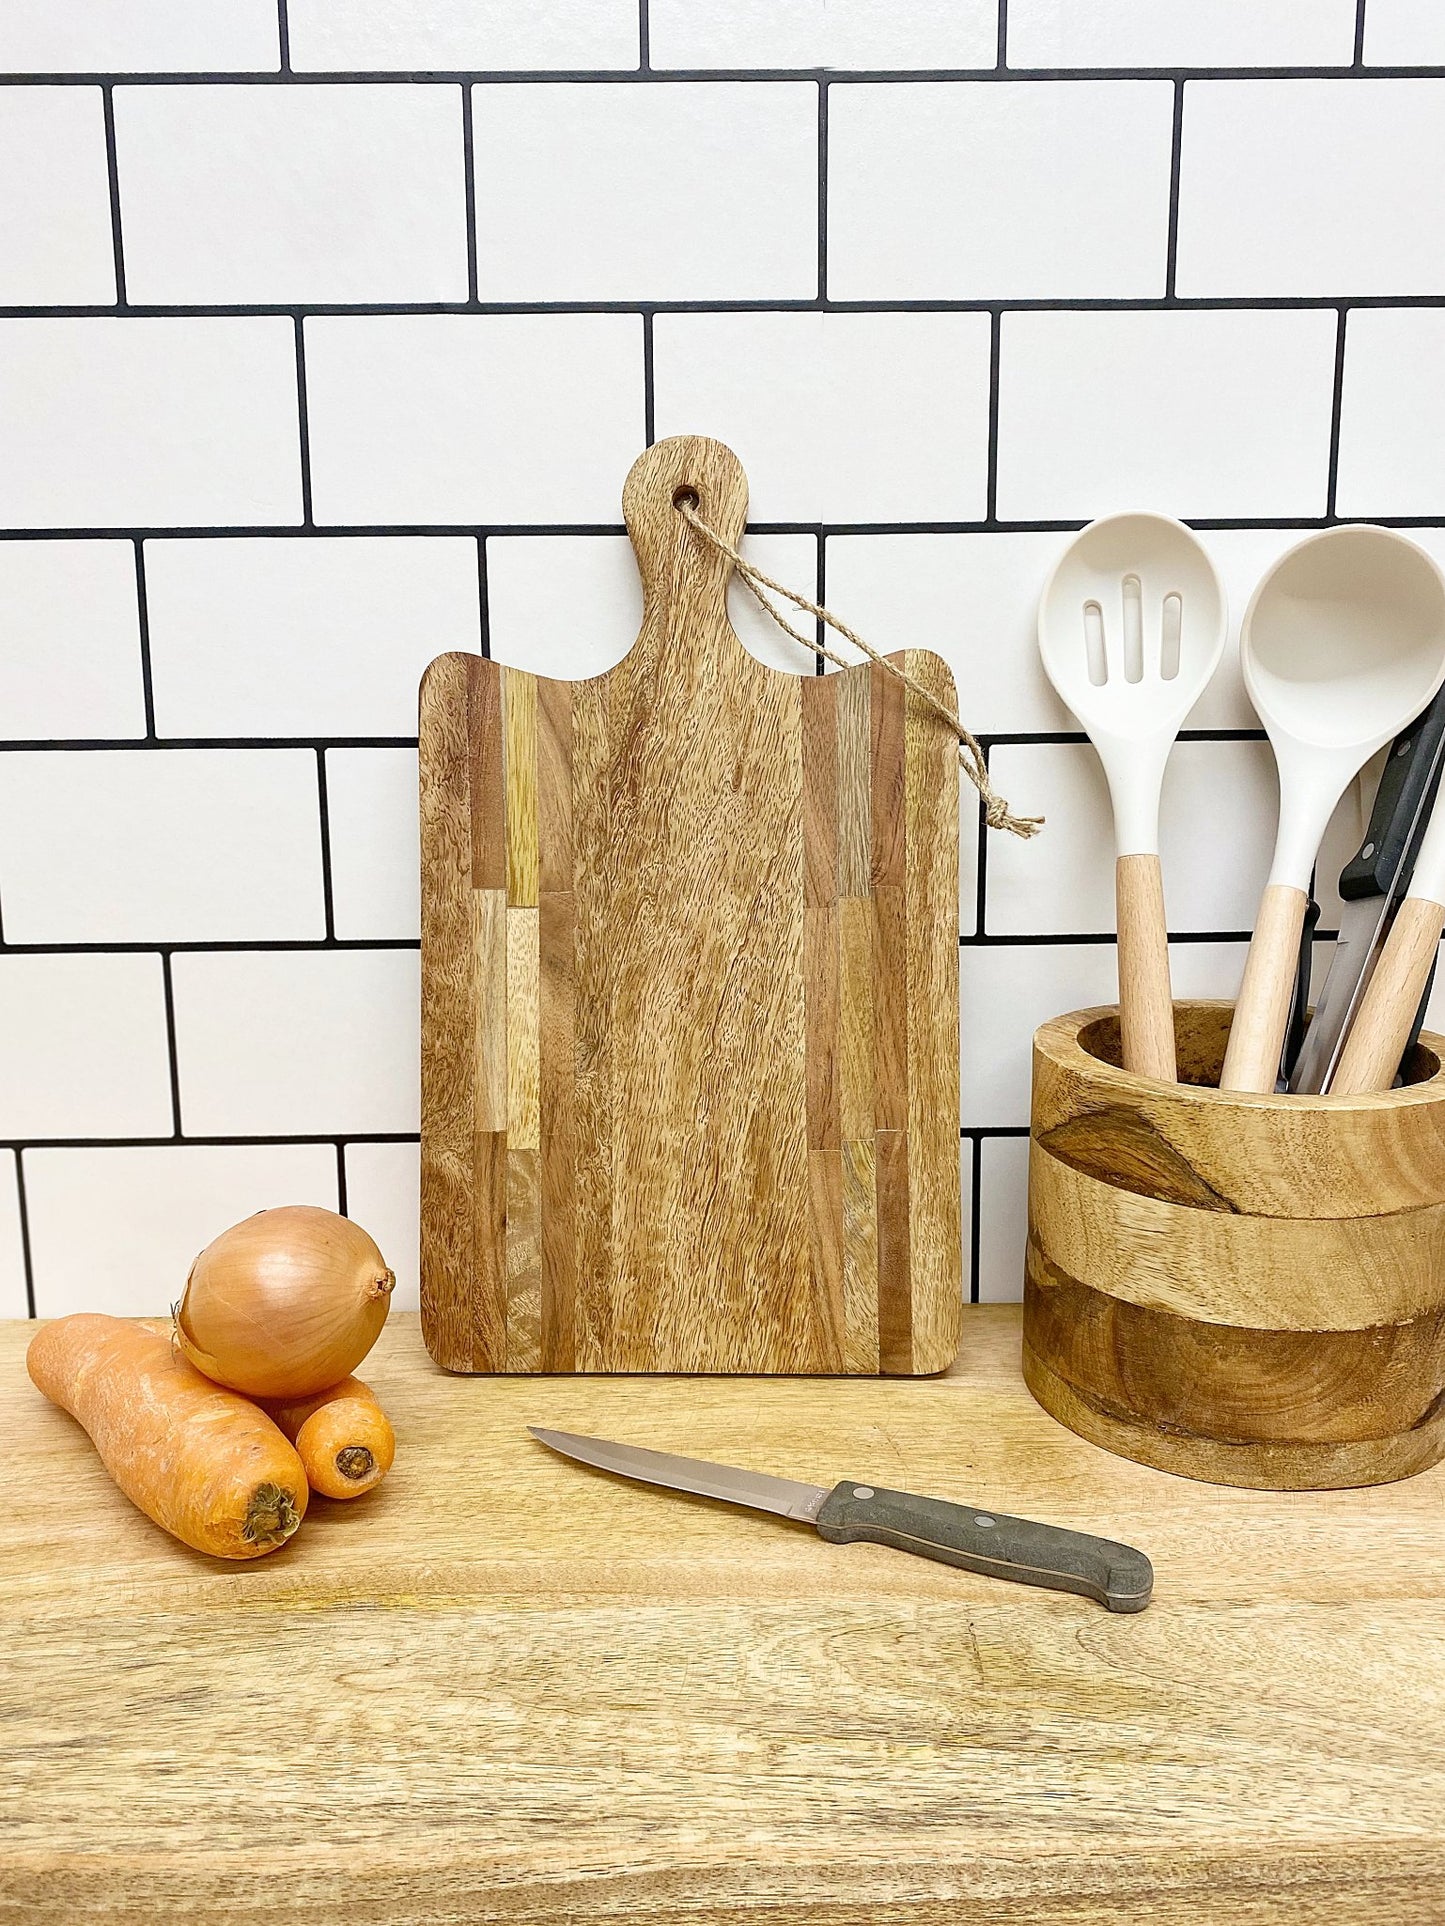 Striped Wooden Small Chopping Board